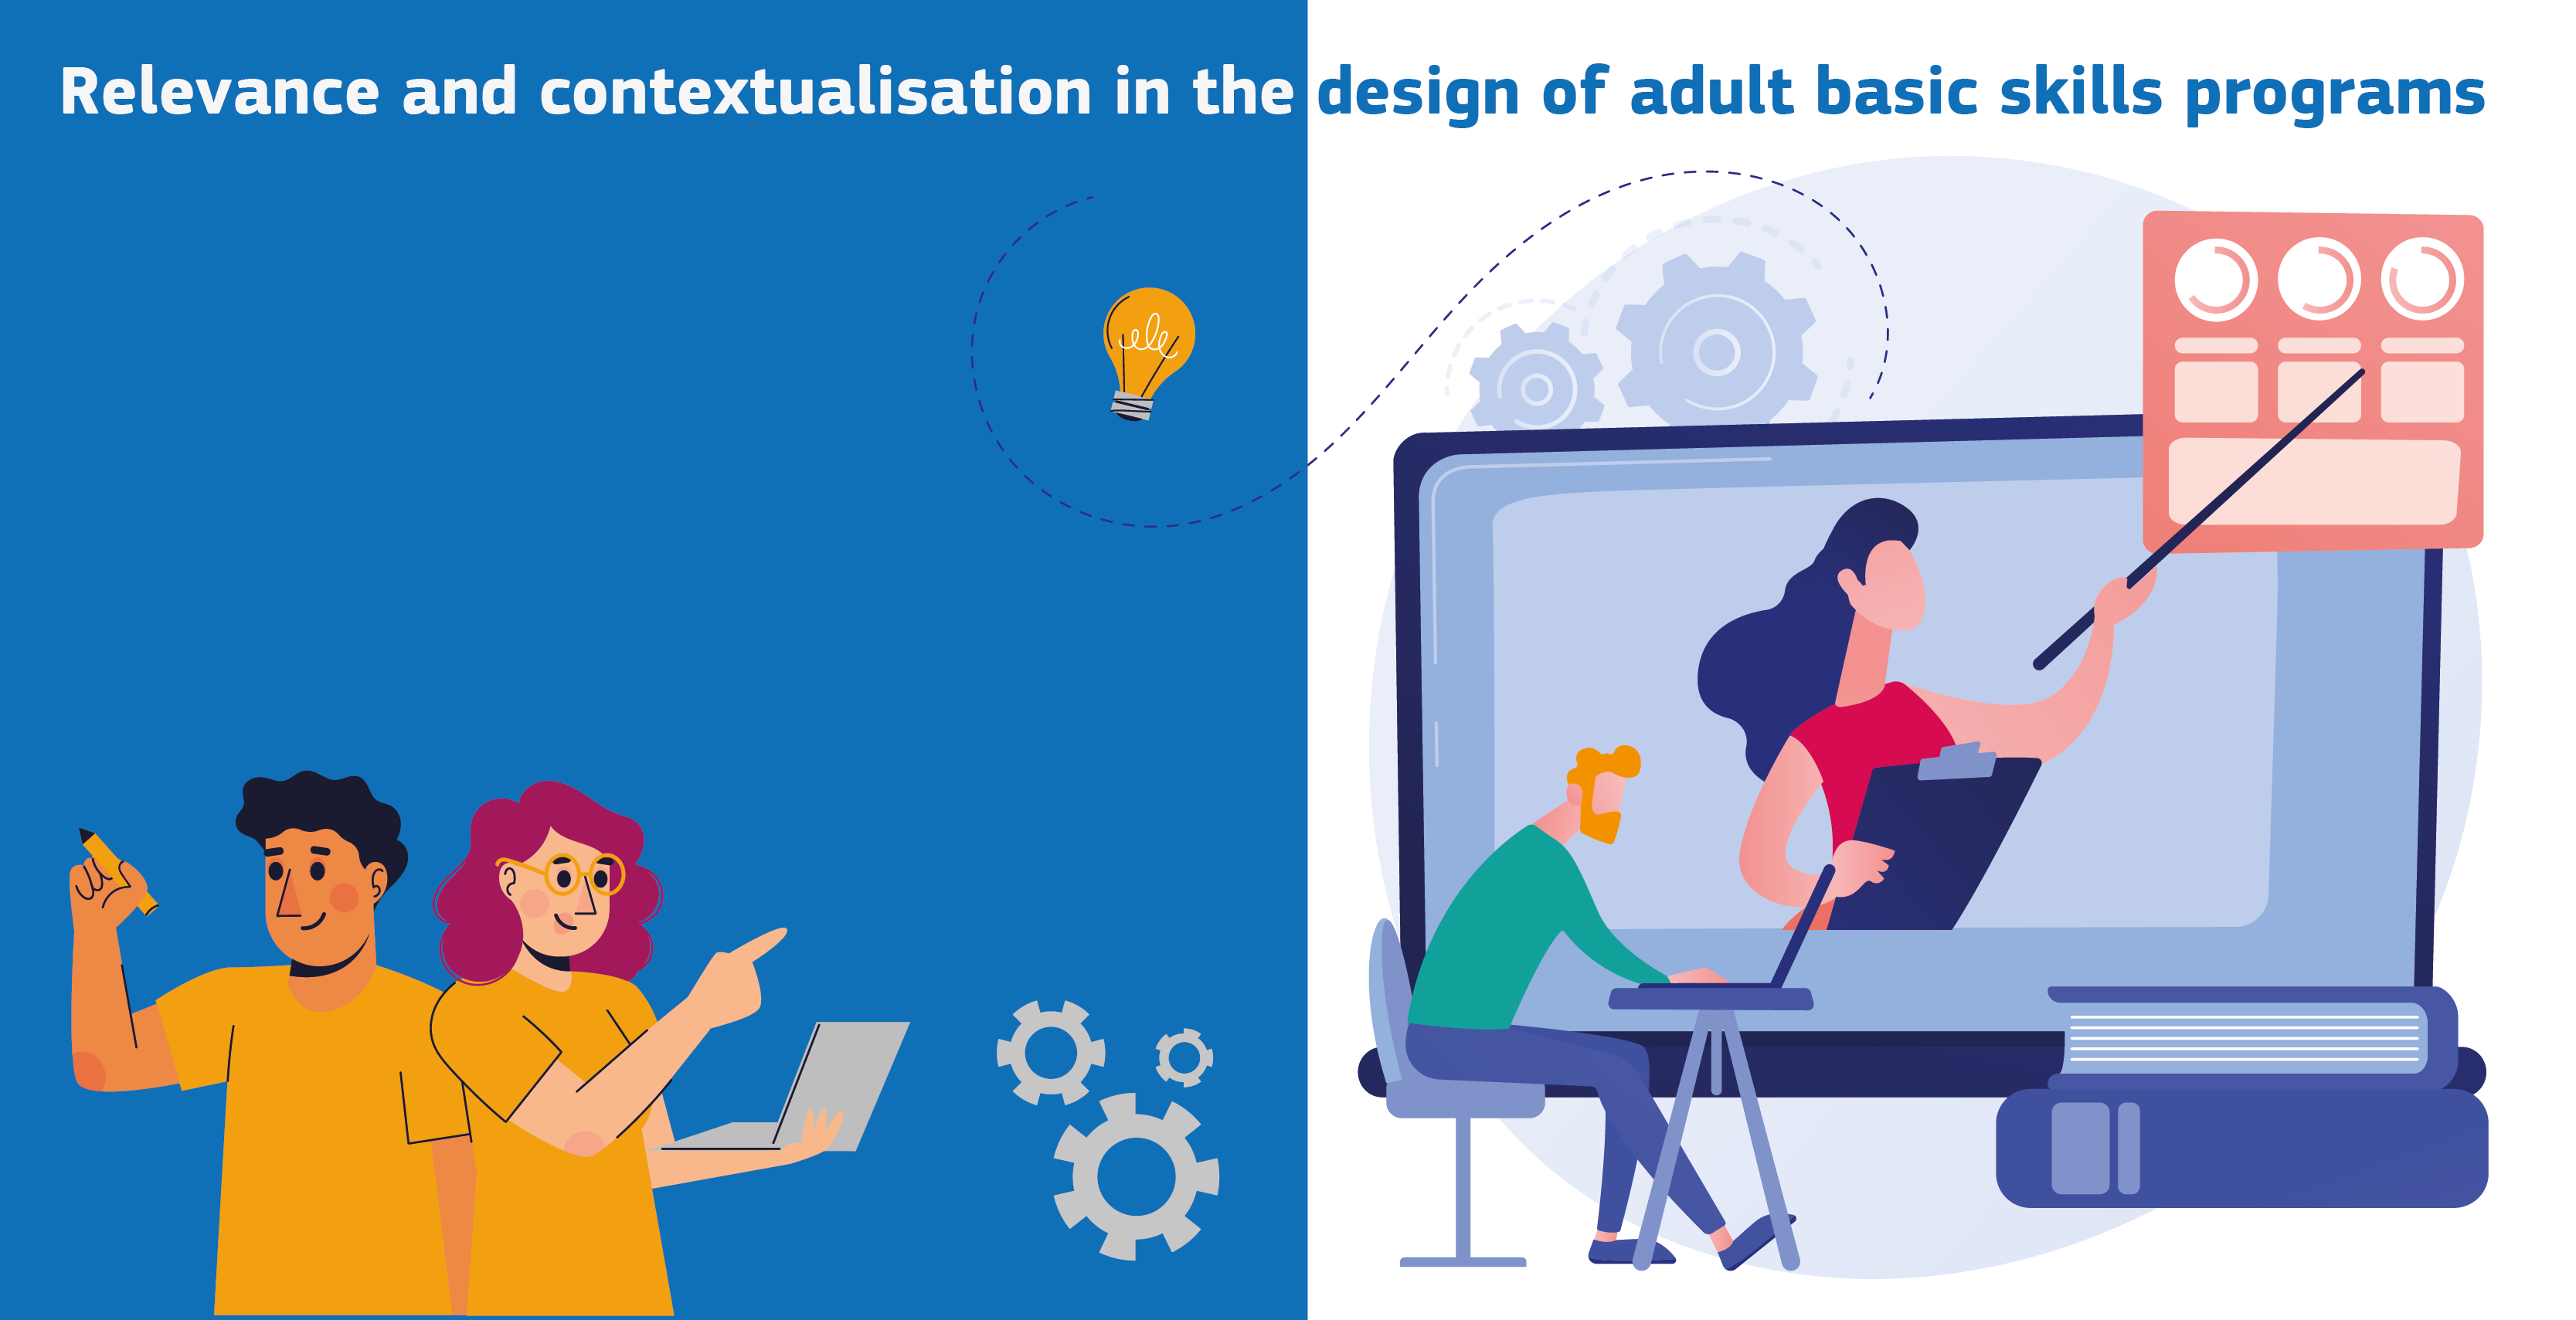 Relevance and contextualisation in the design of adult basic skills programs